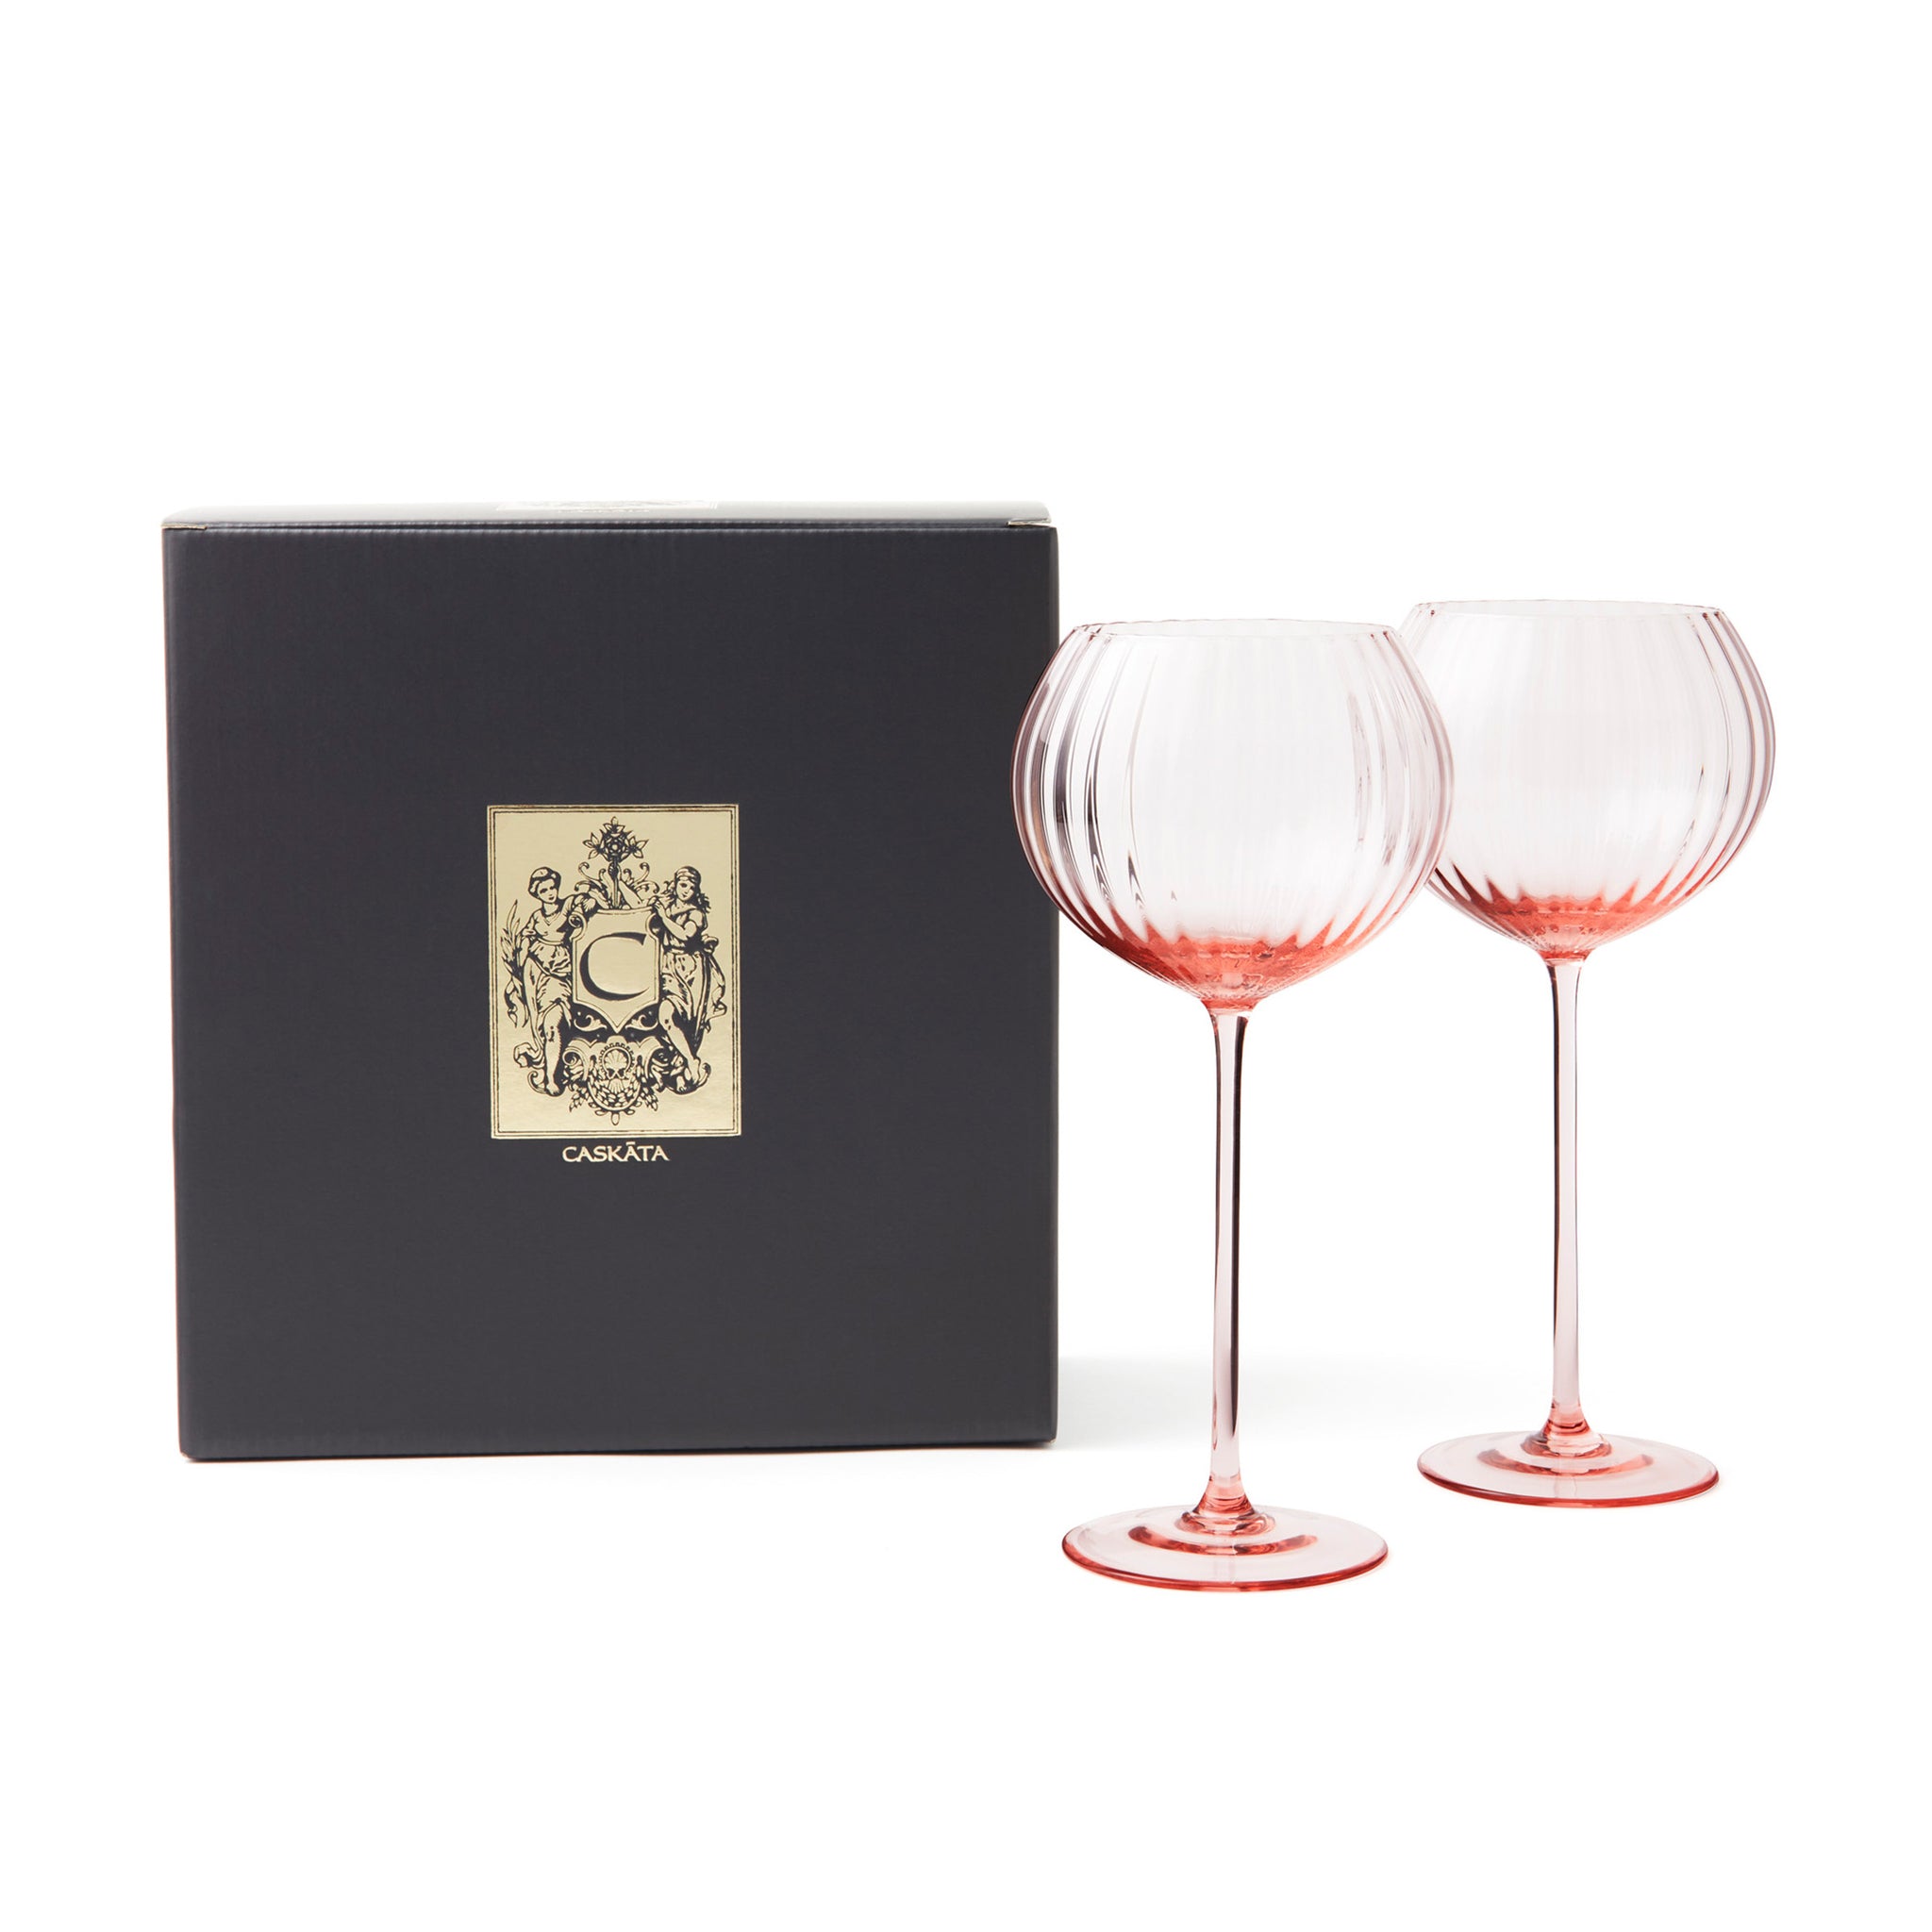 The Queens' Jewels Red Lips Stemless Wine Glass, 0900-017-200